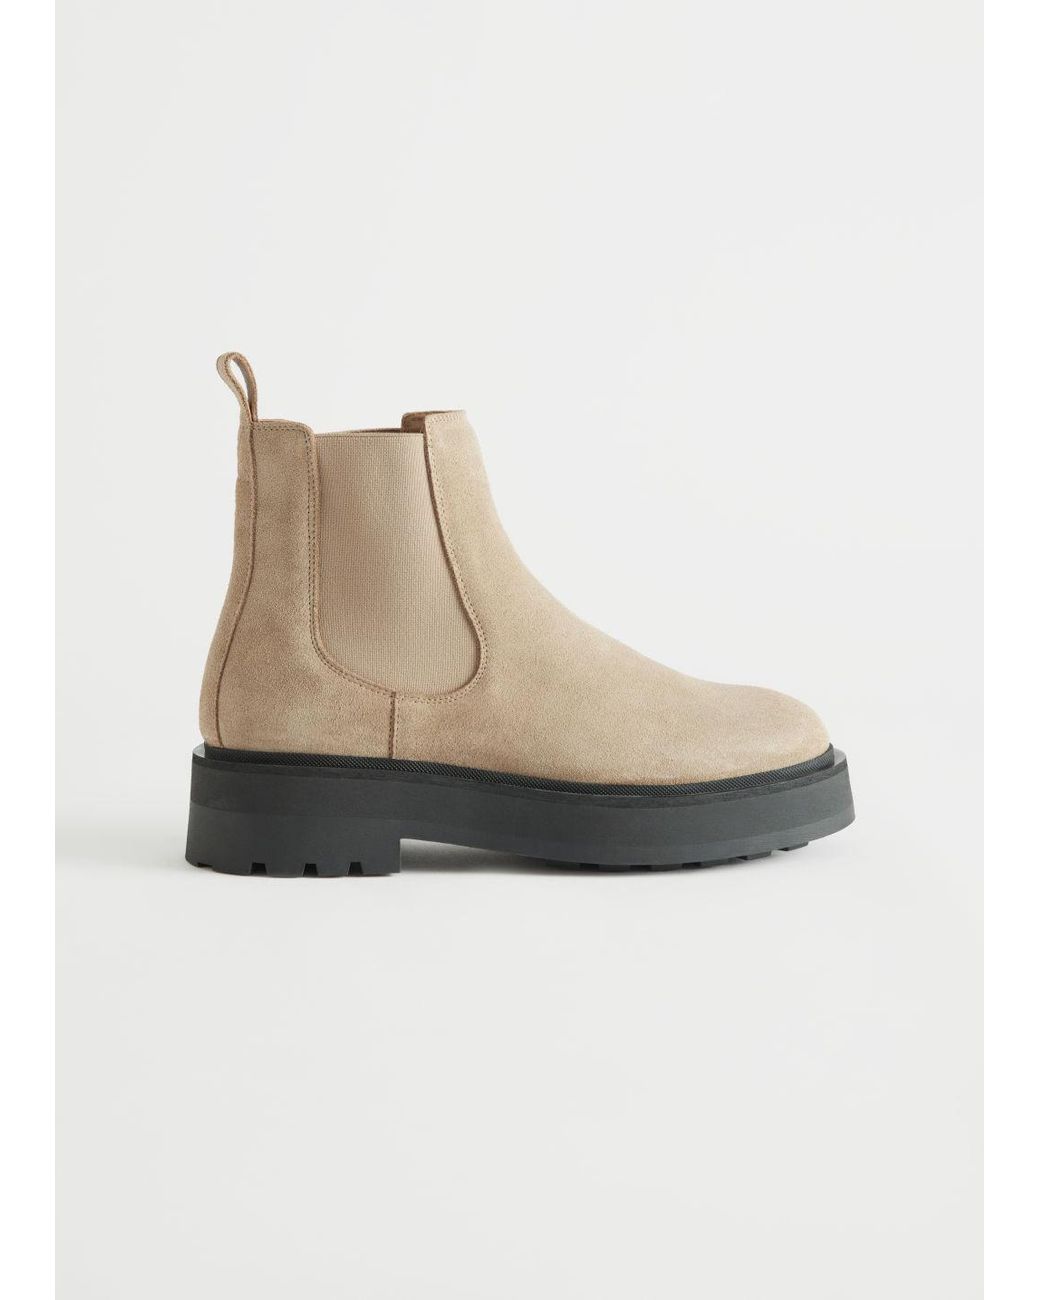 & Other Stories Chunky Chelsea Suede Boots in Natural | Lyst